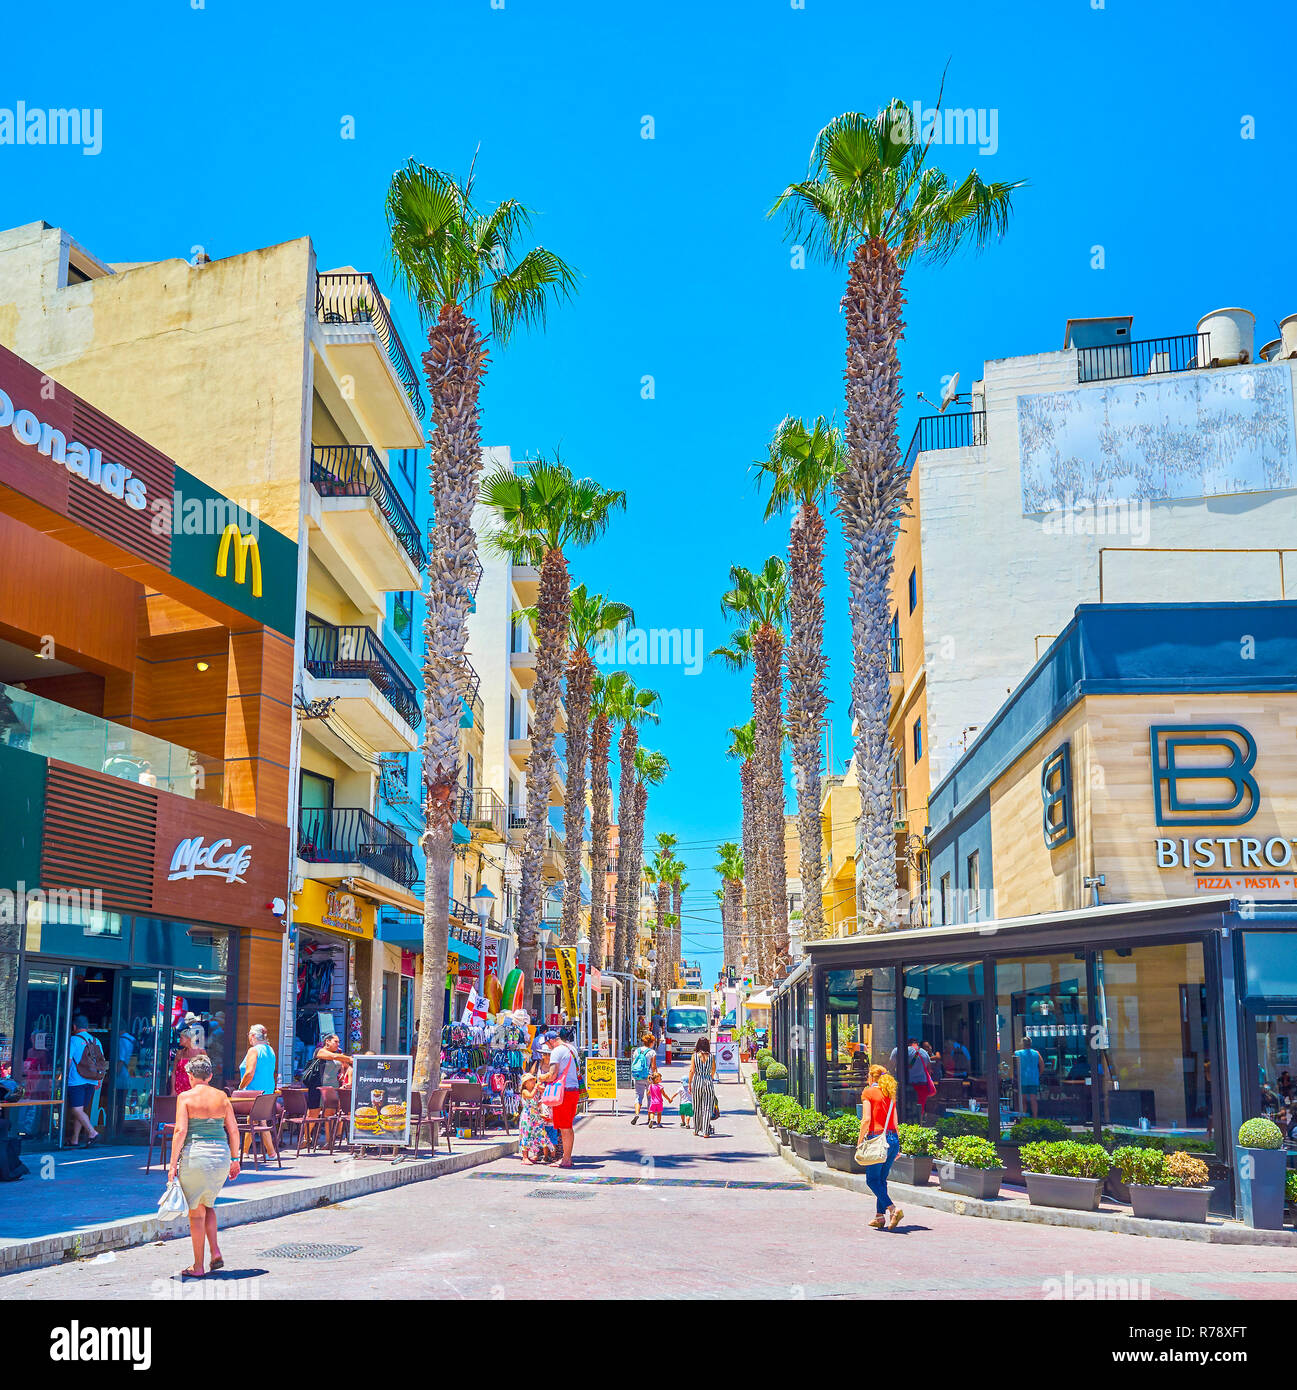 BUGIBBA, MALTA - JUNE 14, 2018: The Pjazza Walkway is the narrow street with the greatest concentration of restaurants and souvenir shops, on June 14  Stock Photo